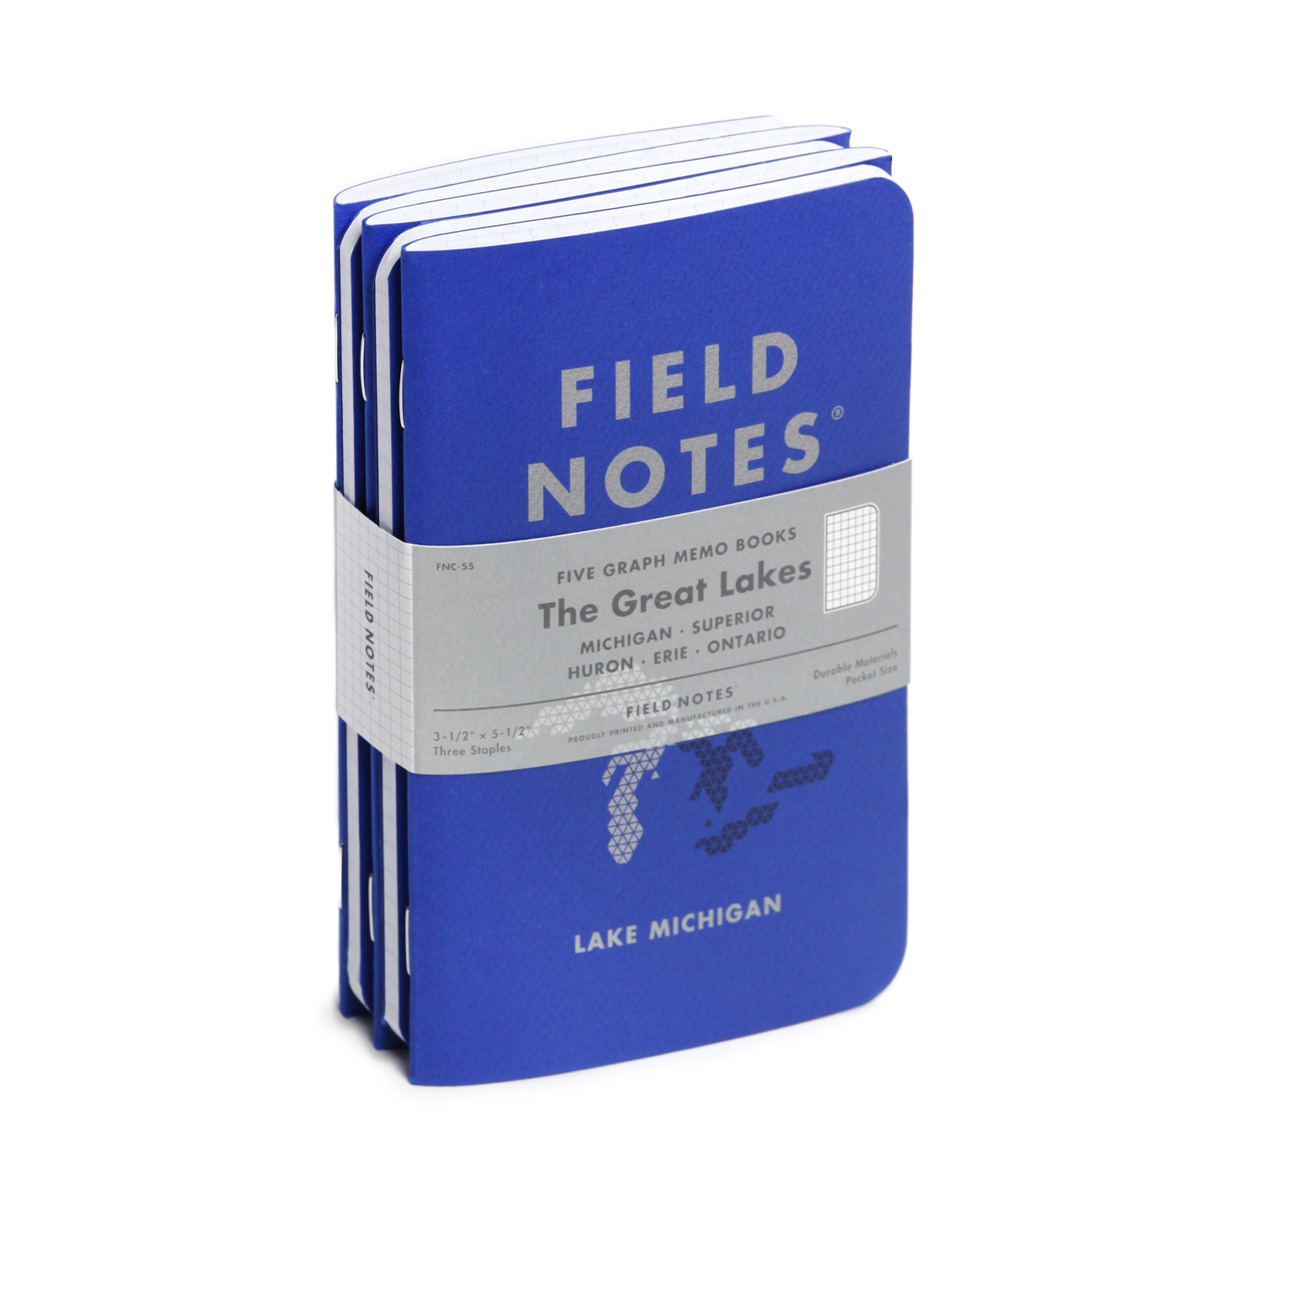 FIELD NOTES – THE GREAT LAKES